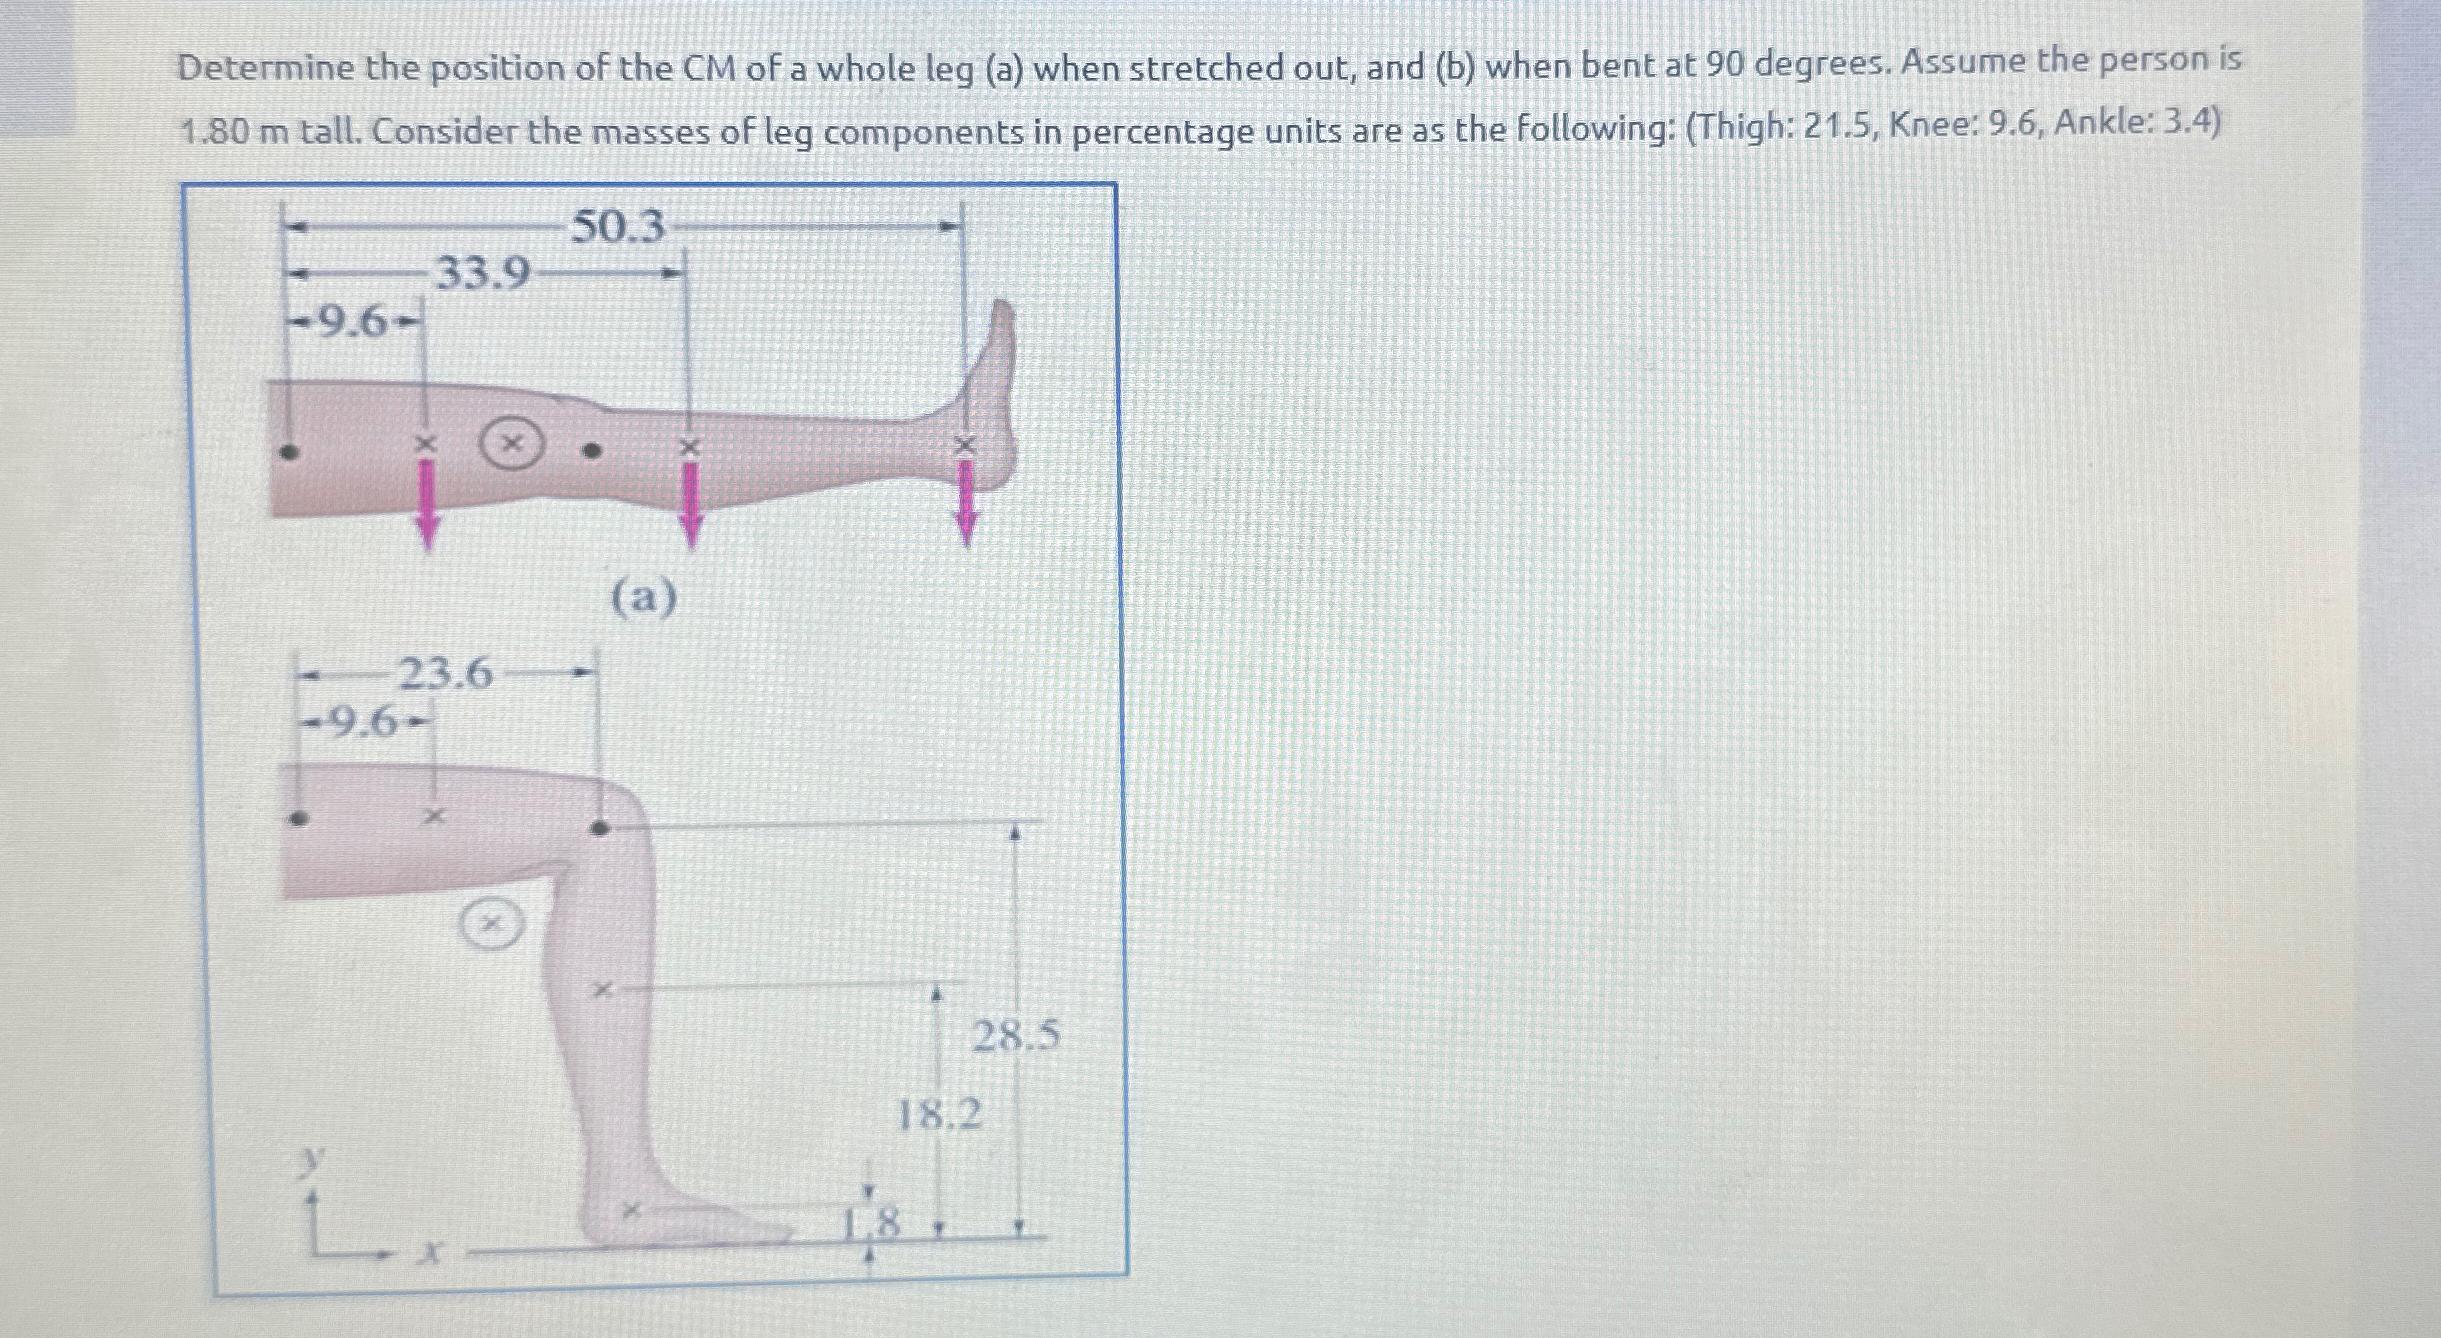 Determine the position of the CM of a whole leg (a) when stretched out, and (b) when bent at 90 degrees.